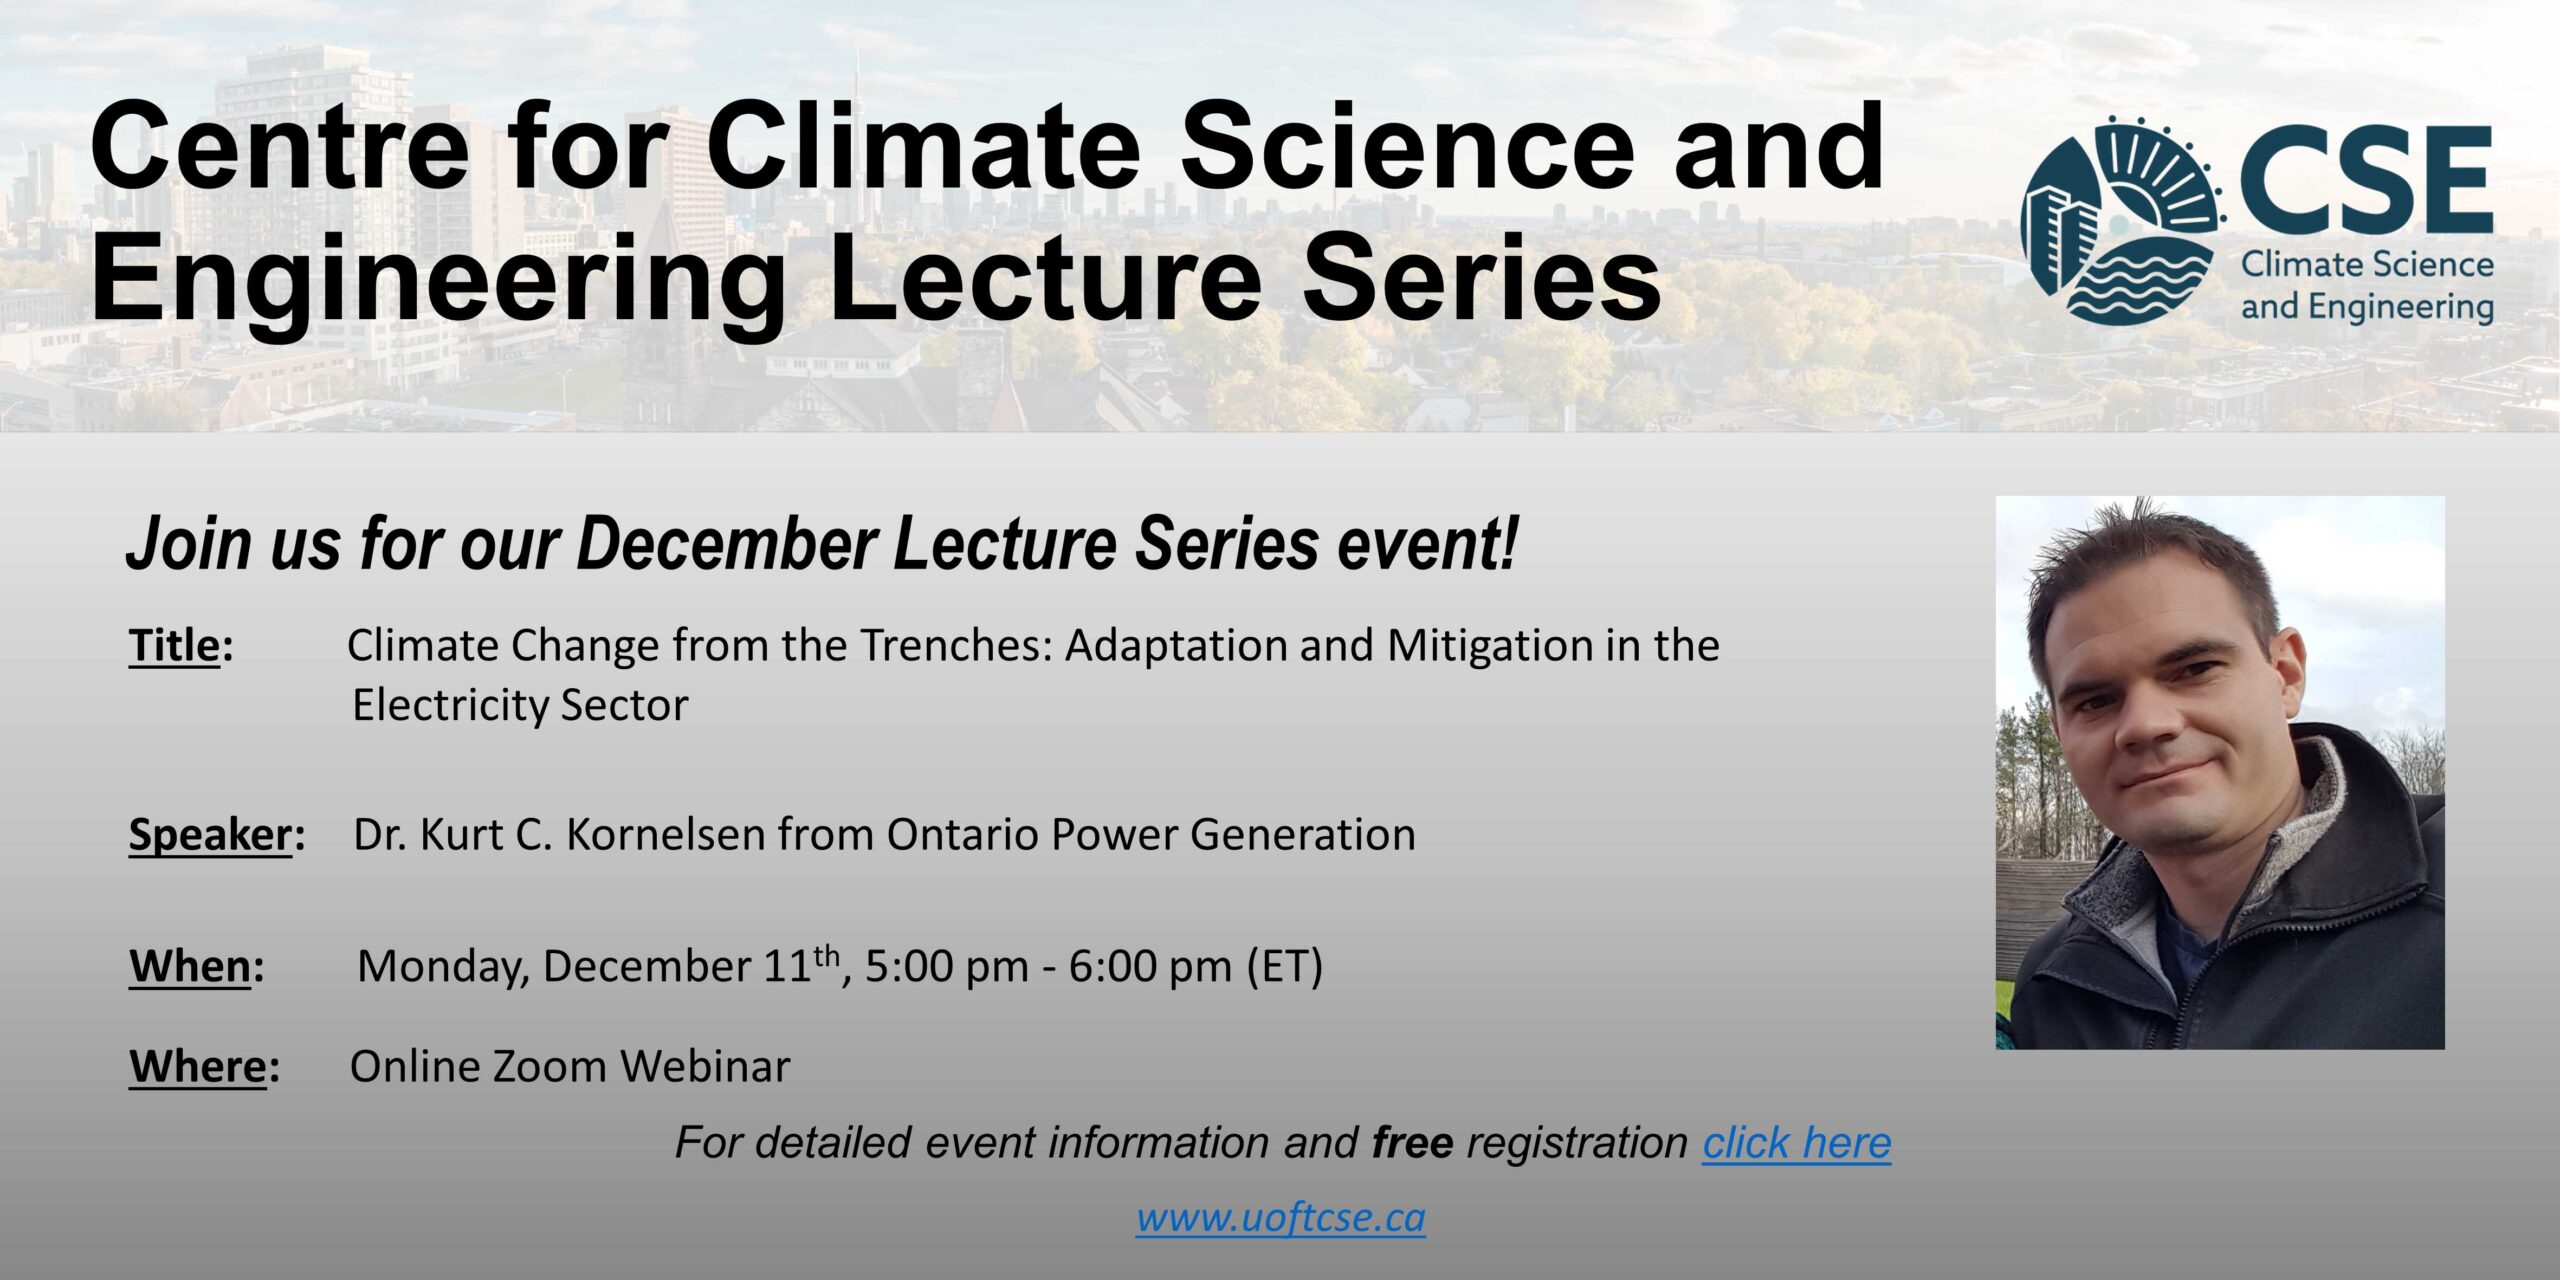 Centre for Climate Science and Engineering Lecture Series